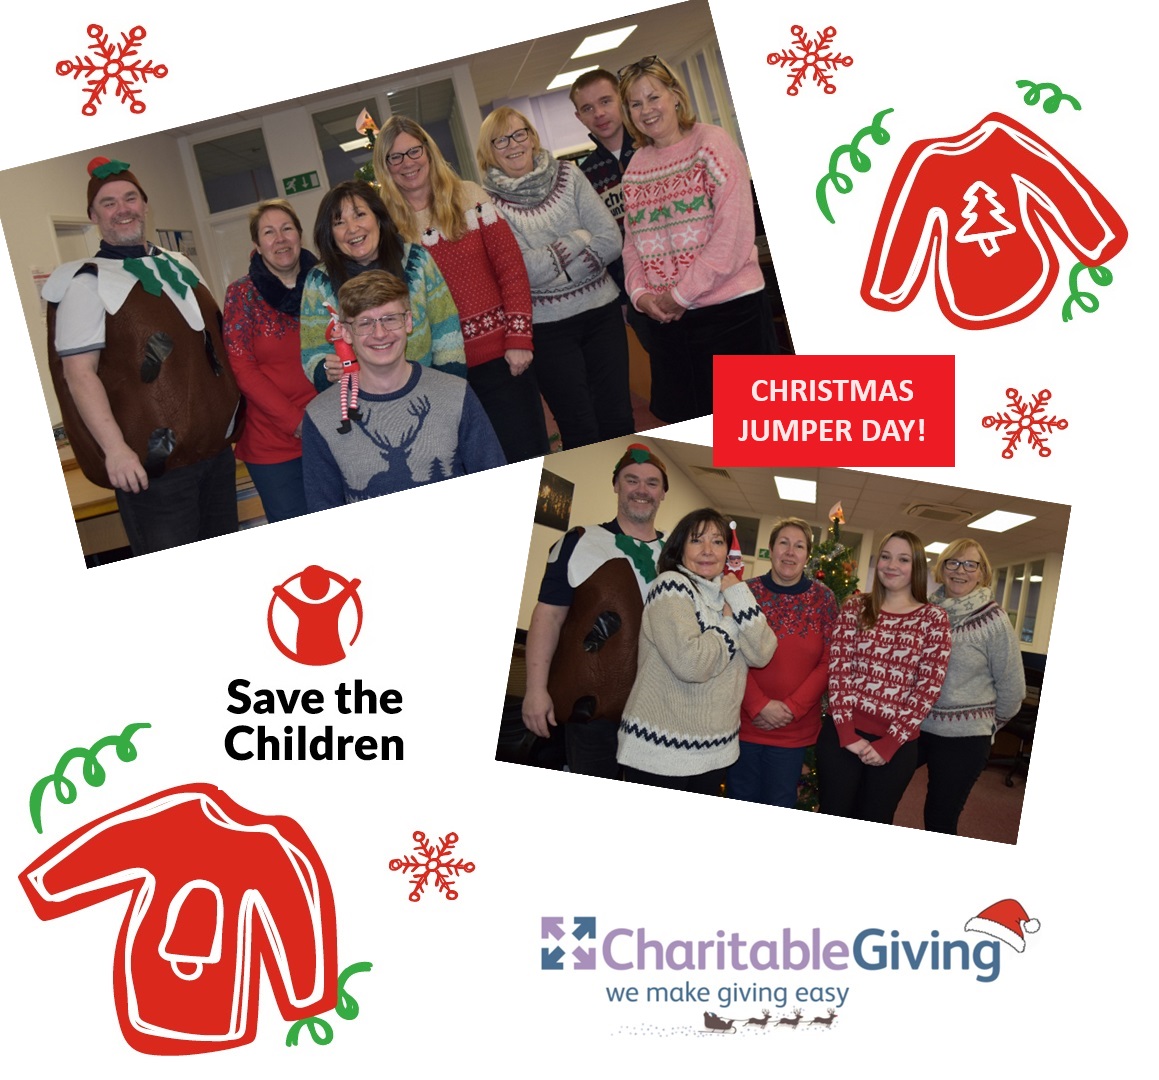 One #ChristmasJumperDay was not enough for our team at CG...so we had two! 🎄🎅 all in support of @savechildrenuk! #Donate #SupportCharity #SaveTheChildren #MakeADifference #PayrollGiving #CharitableGiving